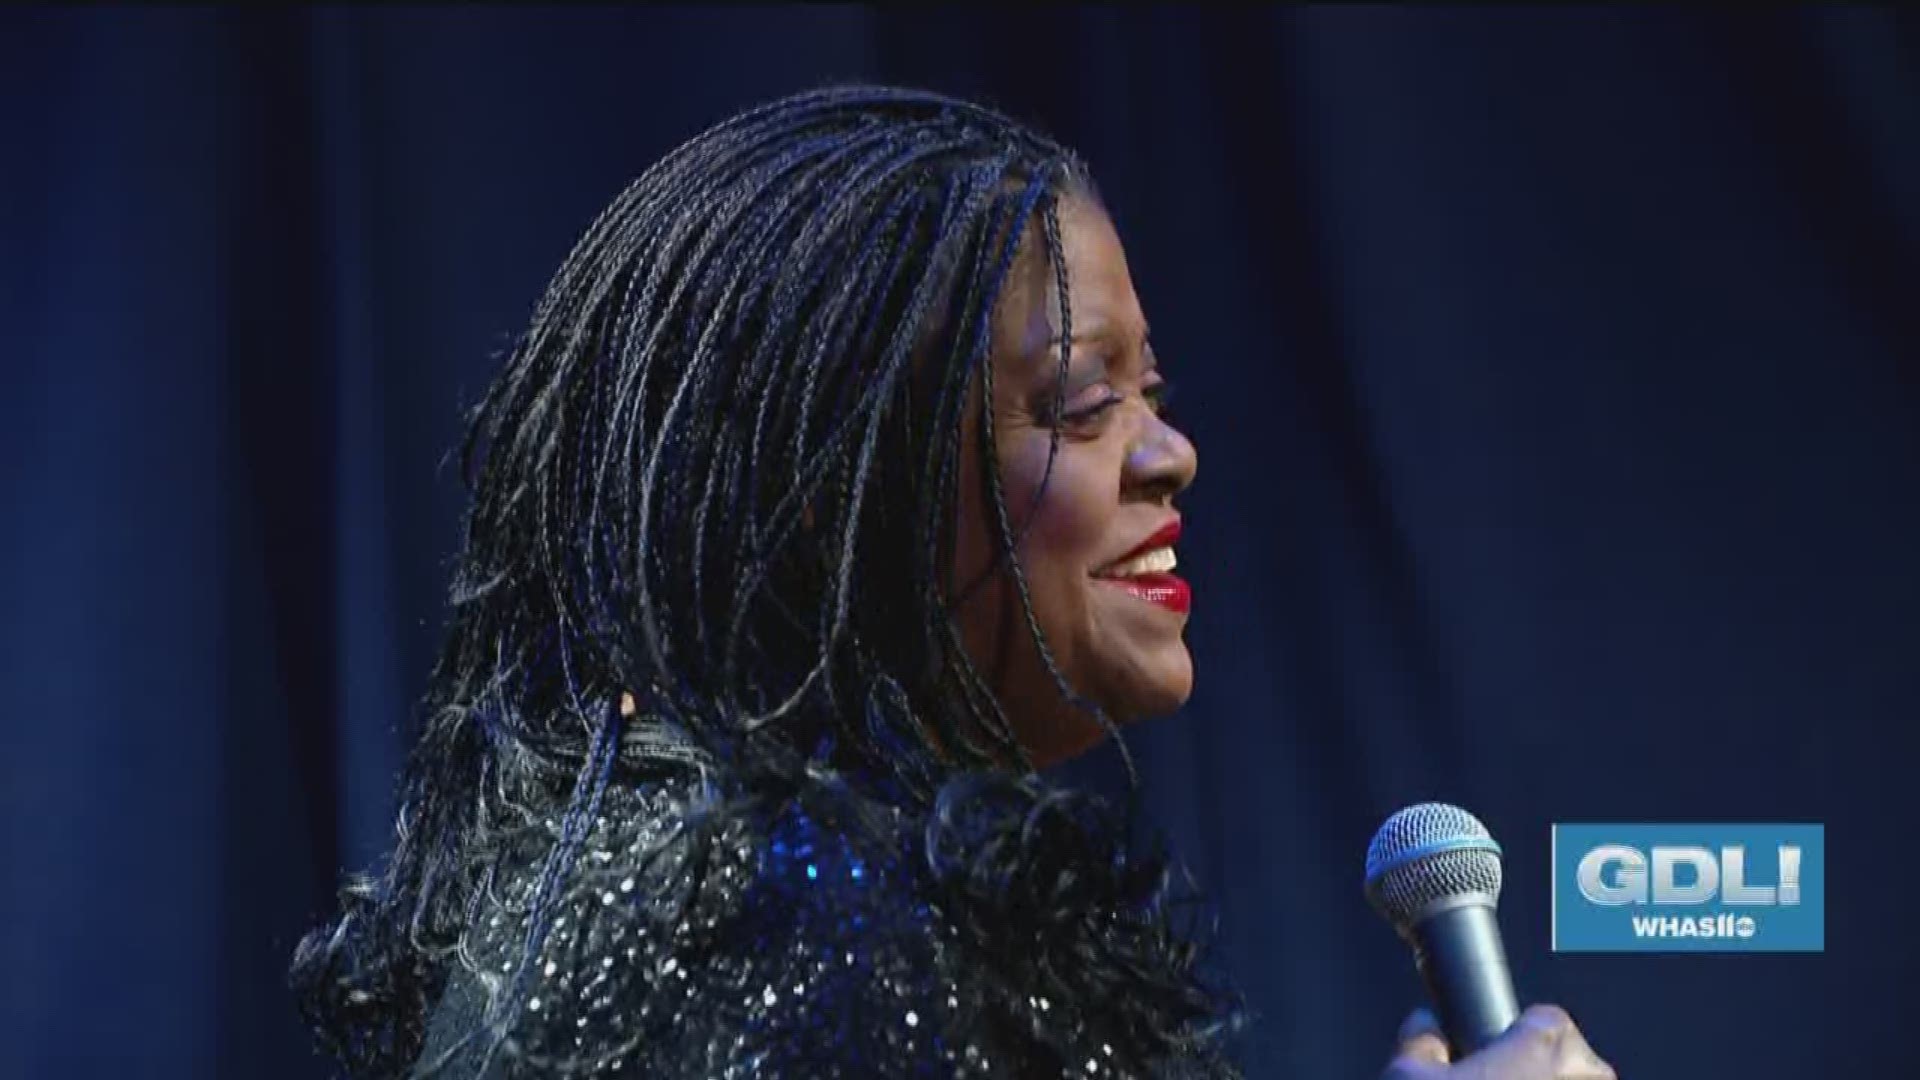 Grammy-Award winning jazz vocalist Carmen Bradford has performed and recorded with legends like Frank Sinatra, Tony Bennett, James Brown and countless others. Now she's taking time to help build a better future for local youth. The  Jazz for Kids benefit concert featuring Carmen Bradford is Saturday, April 6, 2019 starting at 8 PM at UofL's Comstock Hall off West Brandeis Avenue.